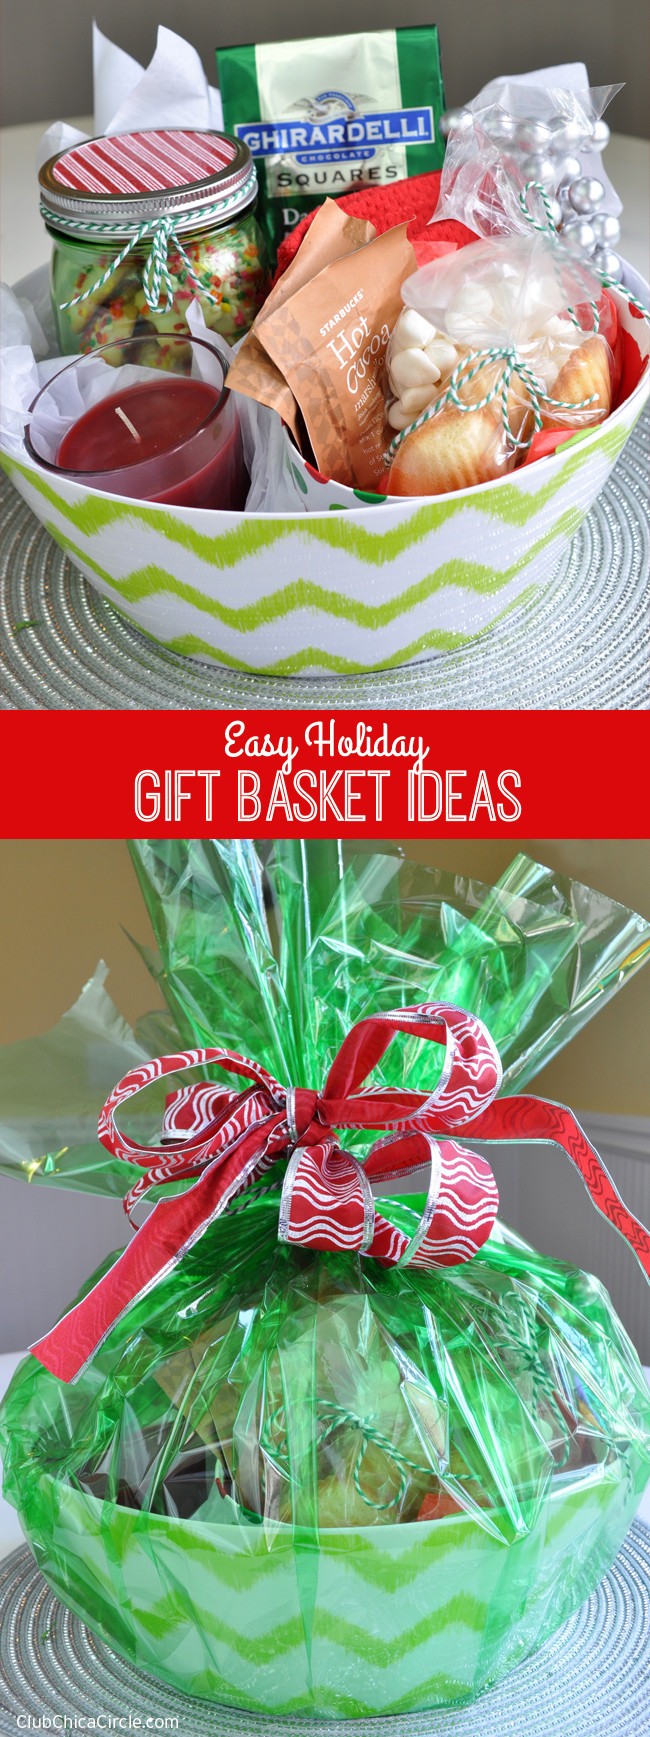 Holiday Gift Basket Ideas
 Easy Holiday Gift Basket Ideas Giveaway